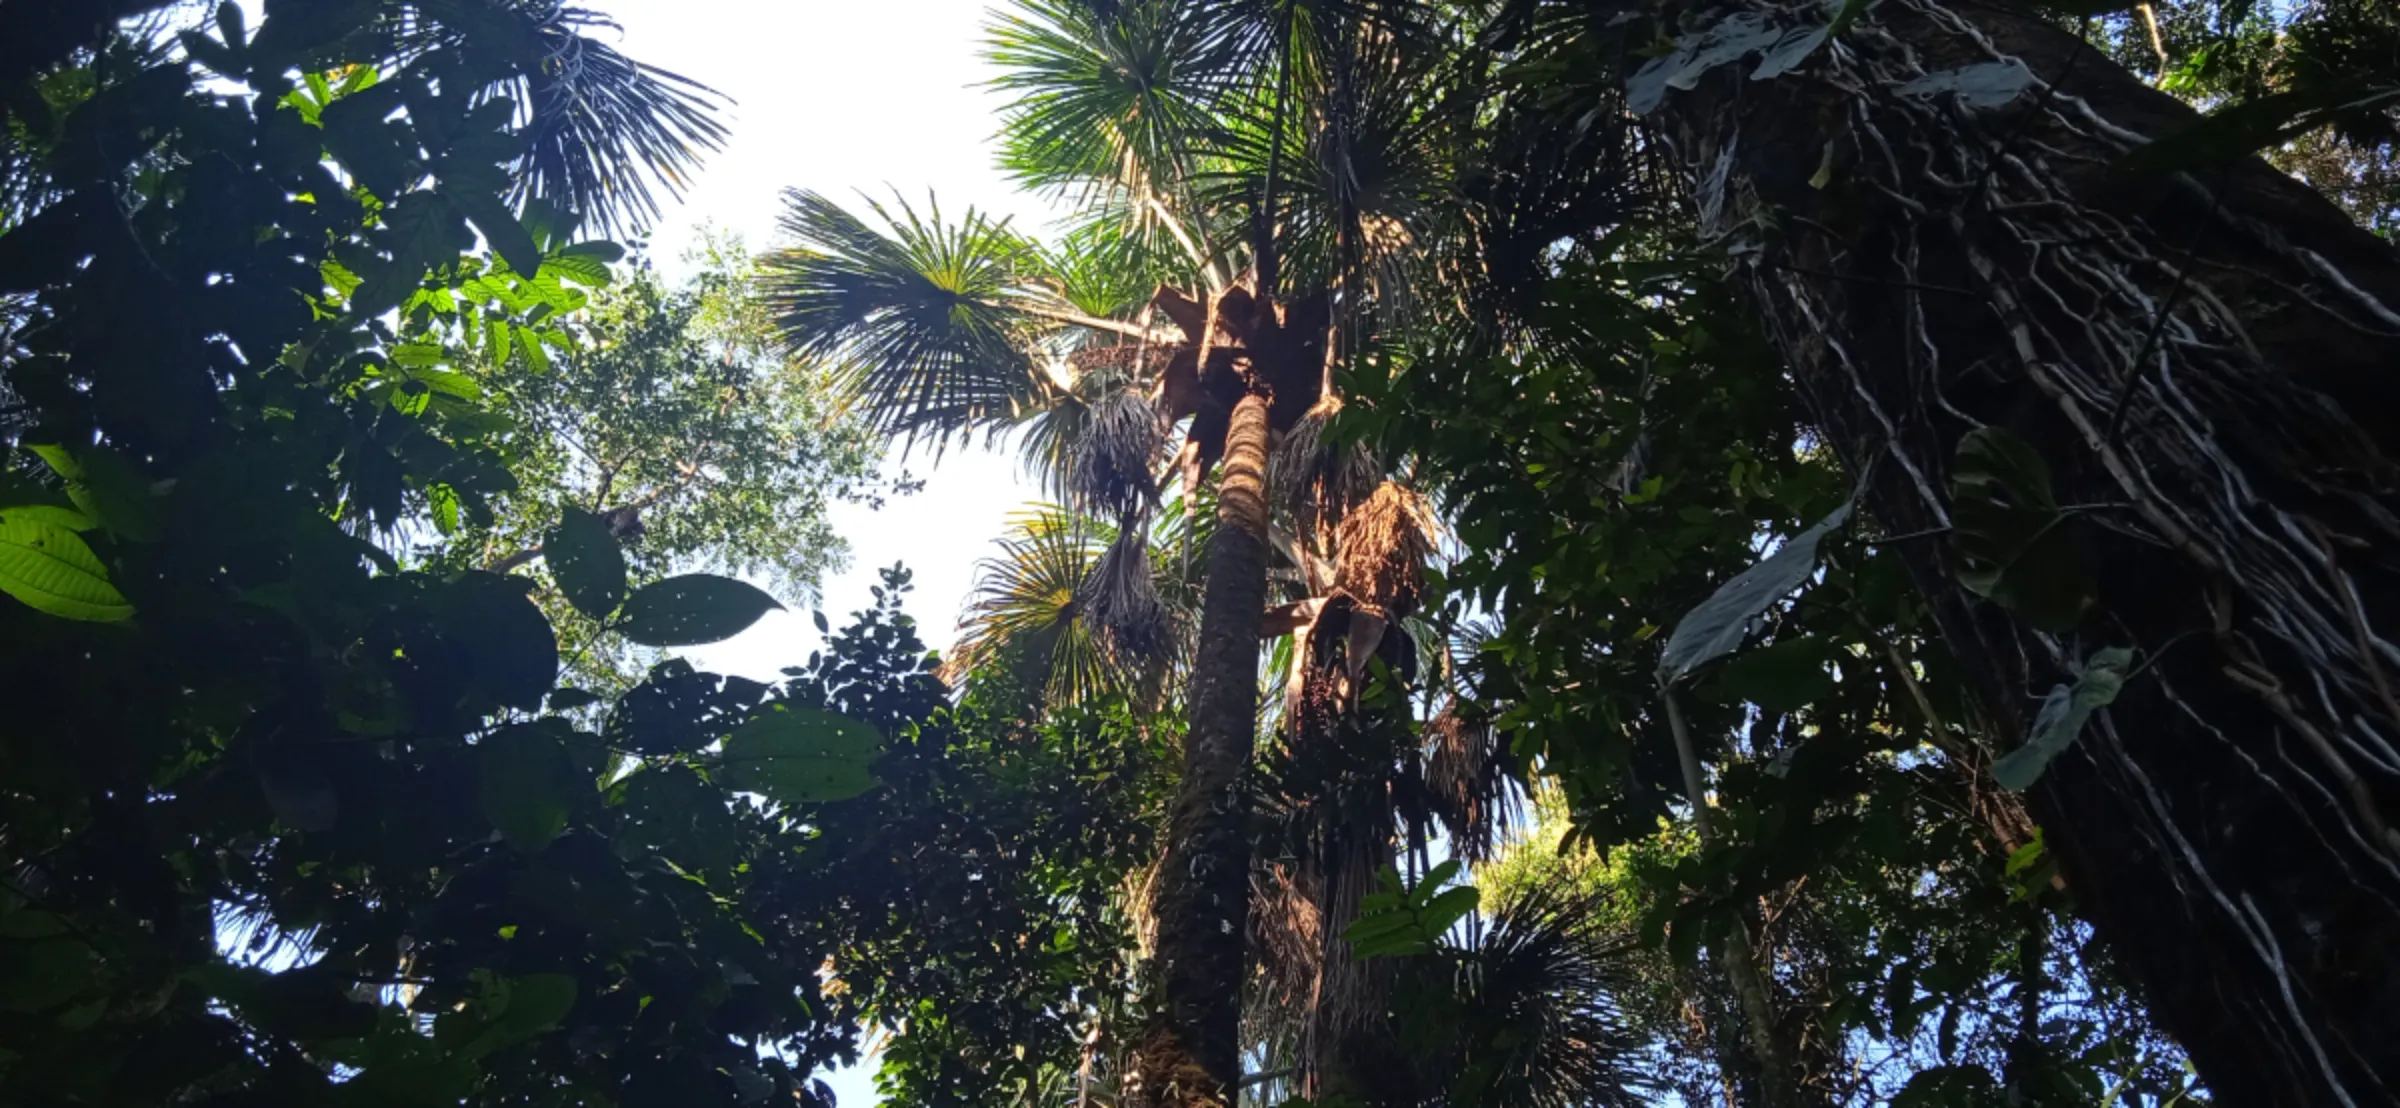 Canangucha palm trees in an Inga indigenous rainforest reserve from which oil can be extracted and used by cosmetic companies, Putumayo, Colombia. February 3, 2023